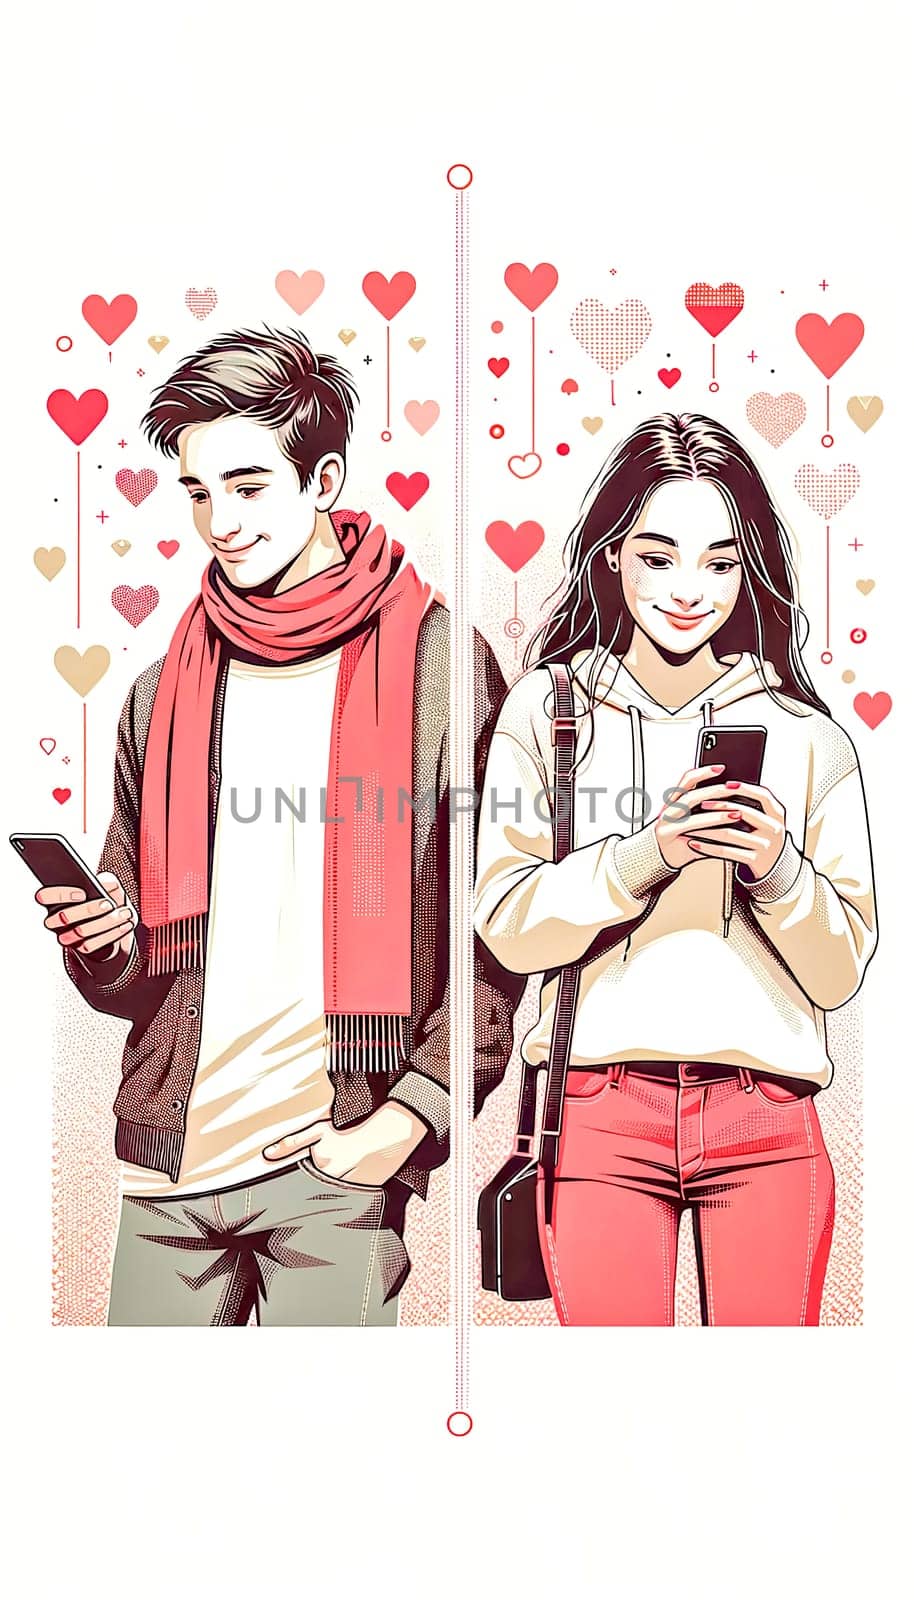 online dating site, young man and woman standing side by side, both holding smartphones and smiling at their screens by Edophoto